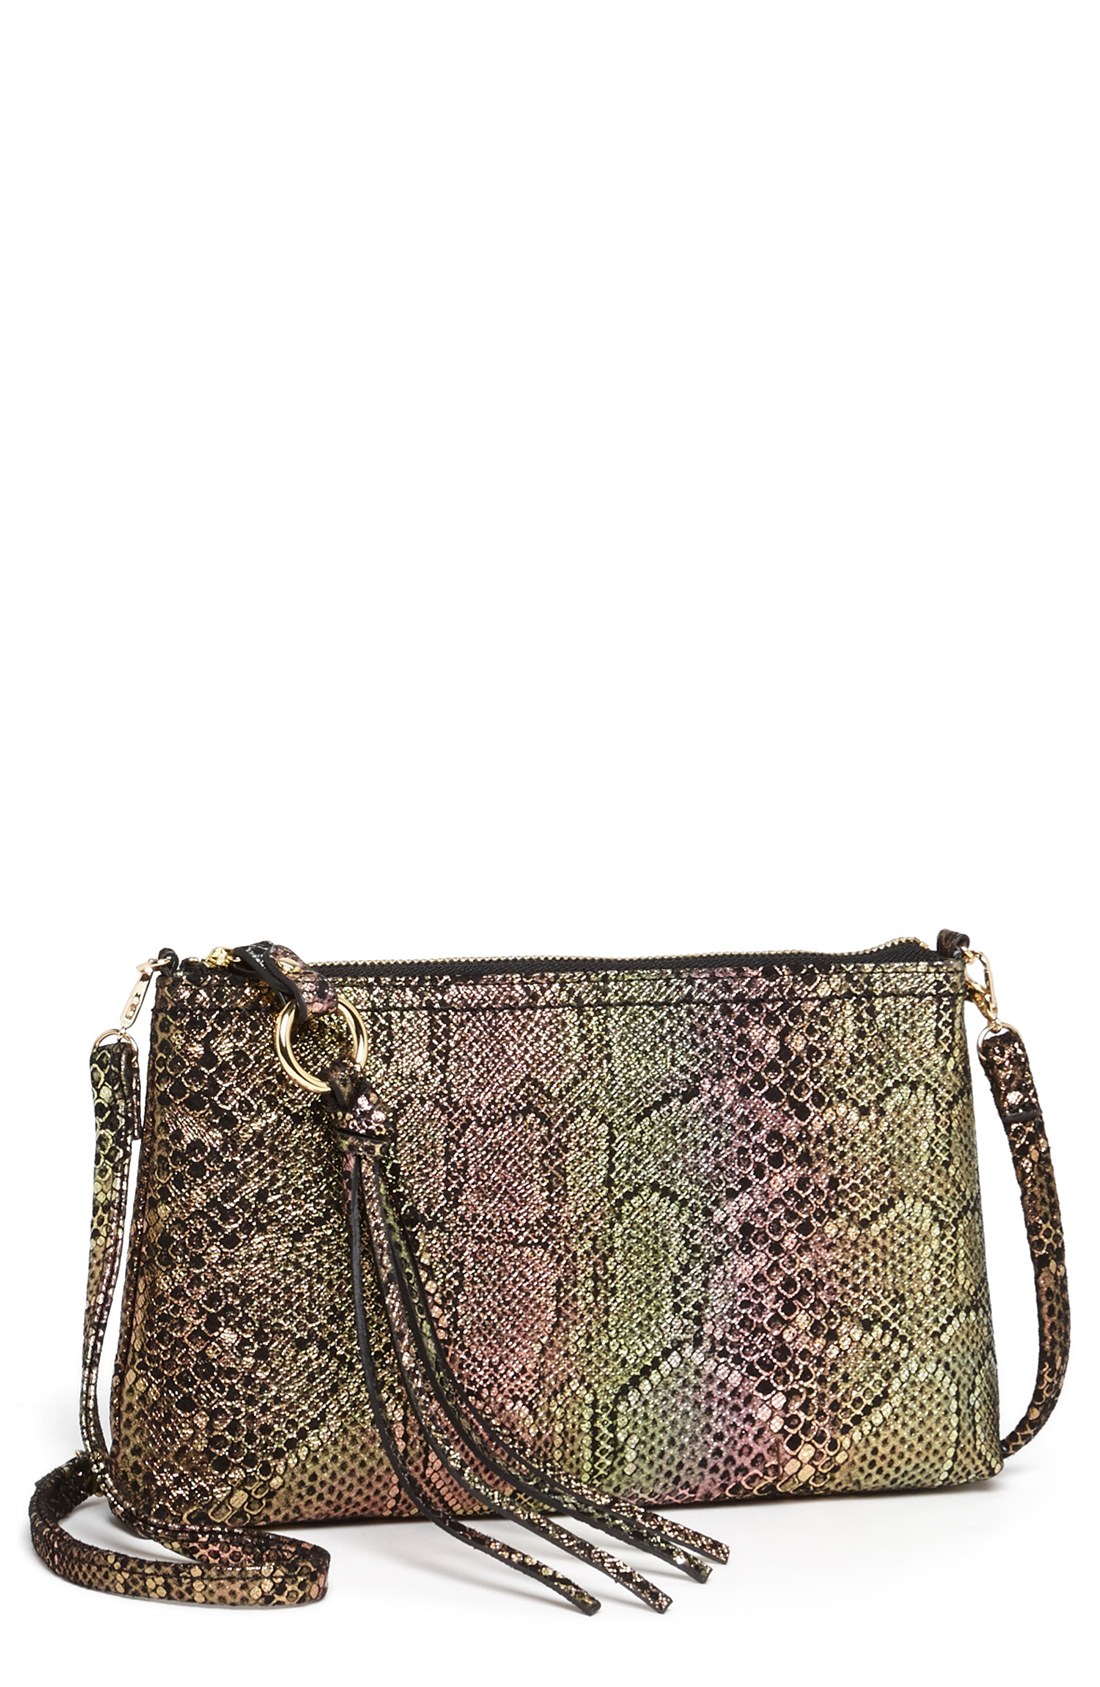 Hobo Darcy Leather Cross Body Bag in Green (Iridescent Exotic) | Lyst